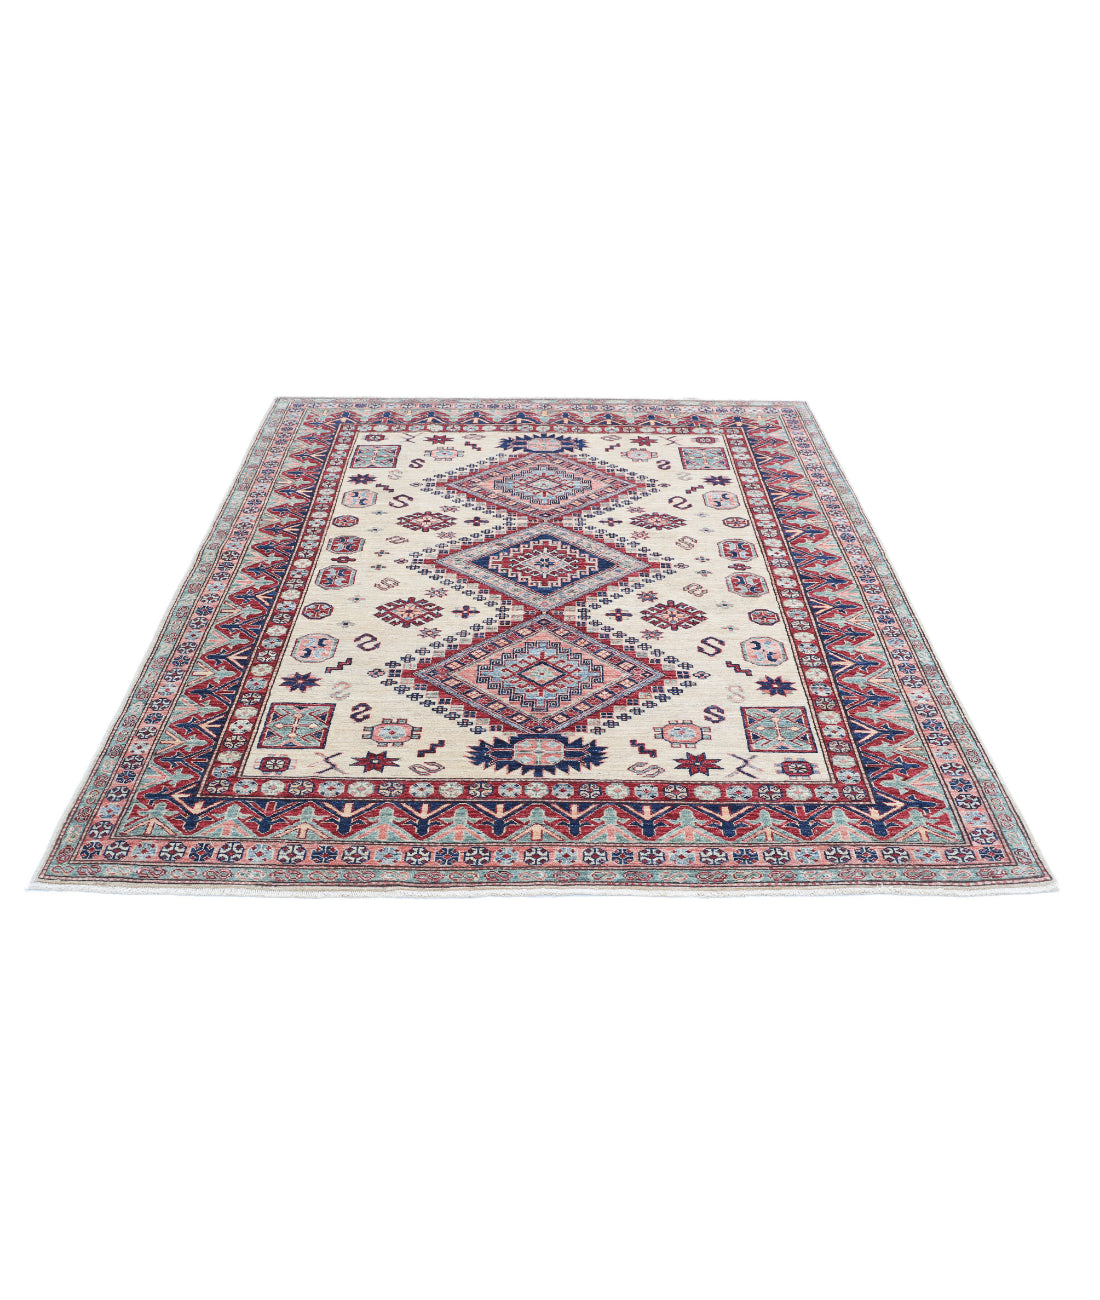 Hand Knotted Royal Kazak Wool Rug - 5'11'' x 6'7'' 5'11'' x 6'7'' (178 X 198) / Ivory / Red